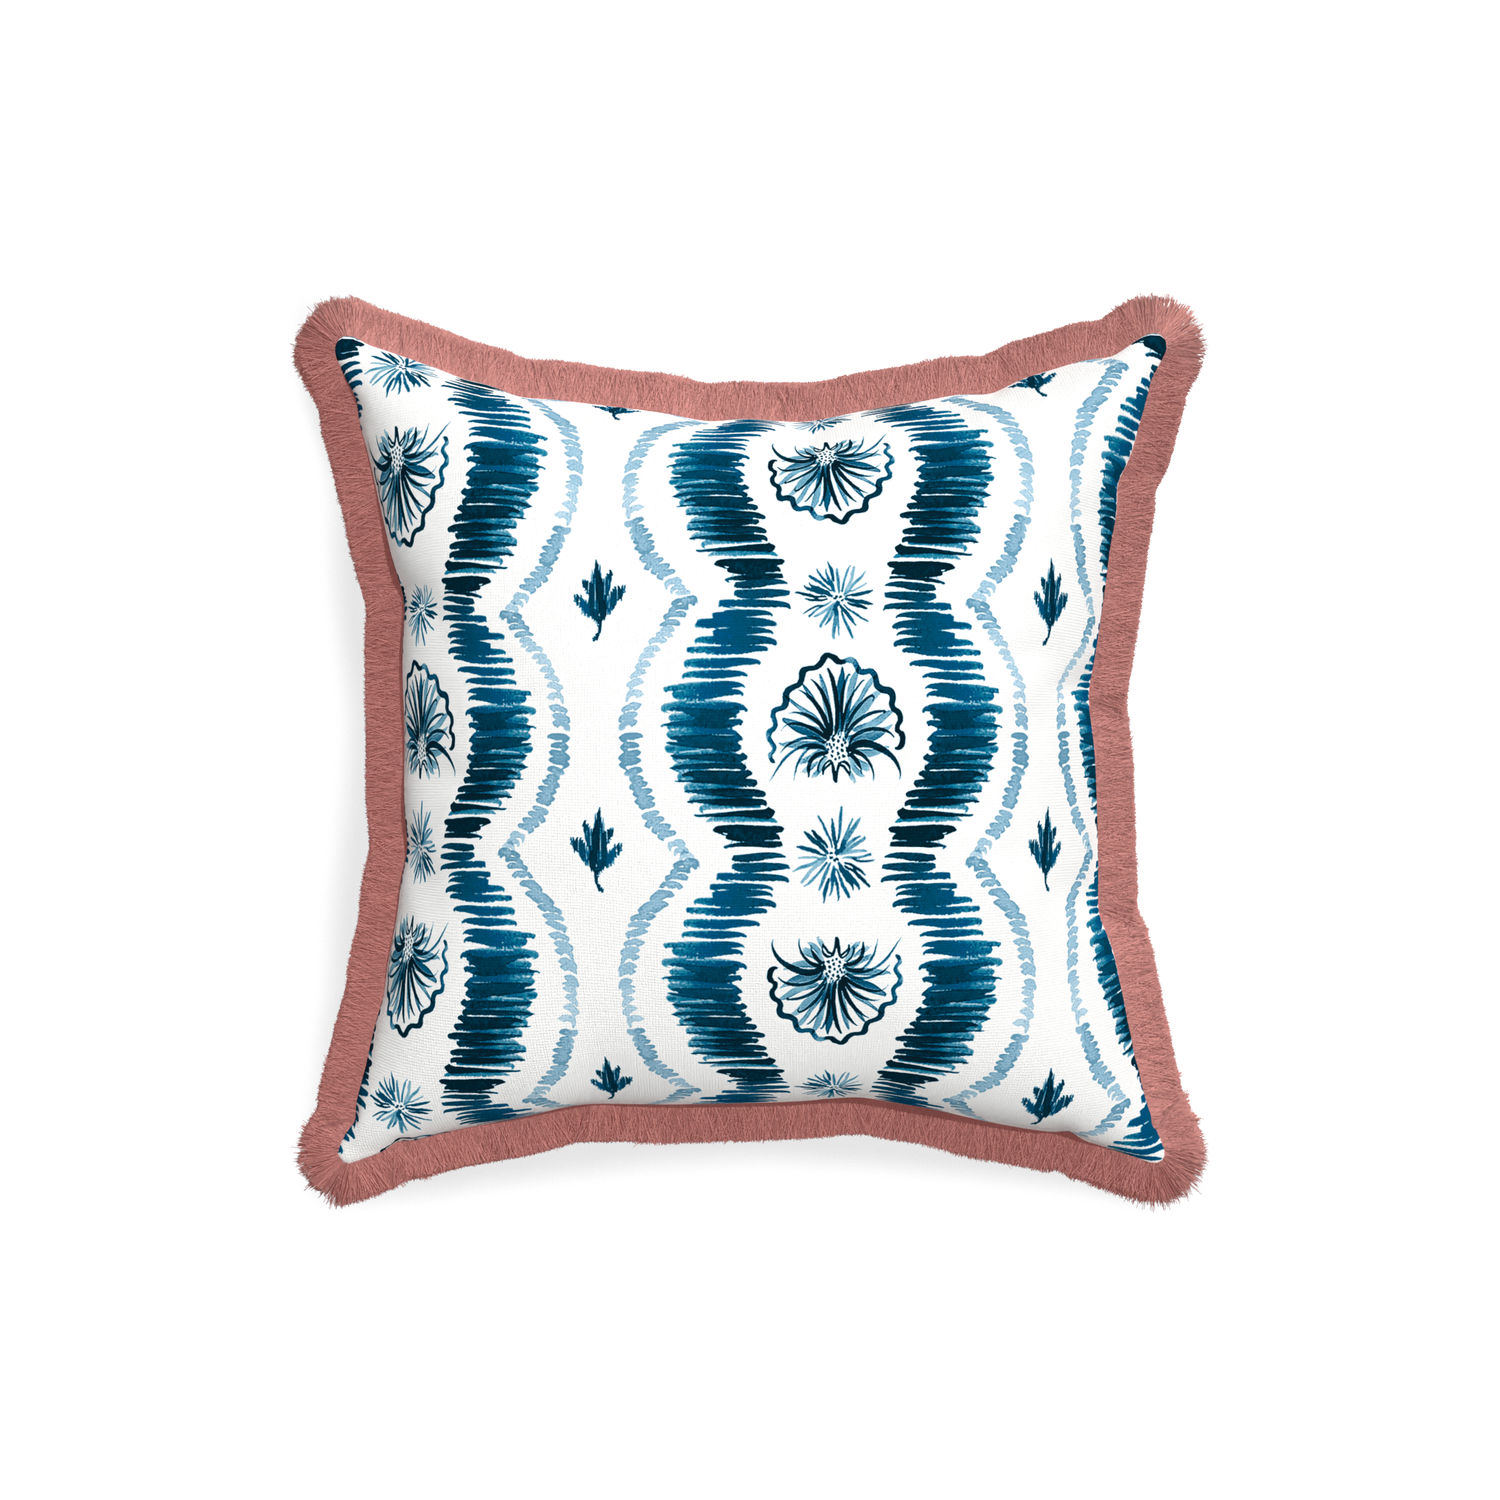 18 inch Square Blue Ikat Stripe Pillow with dusty rose fringe